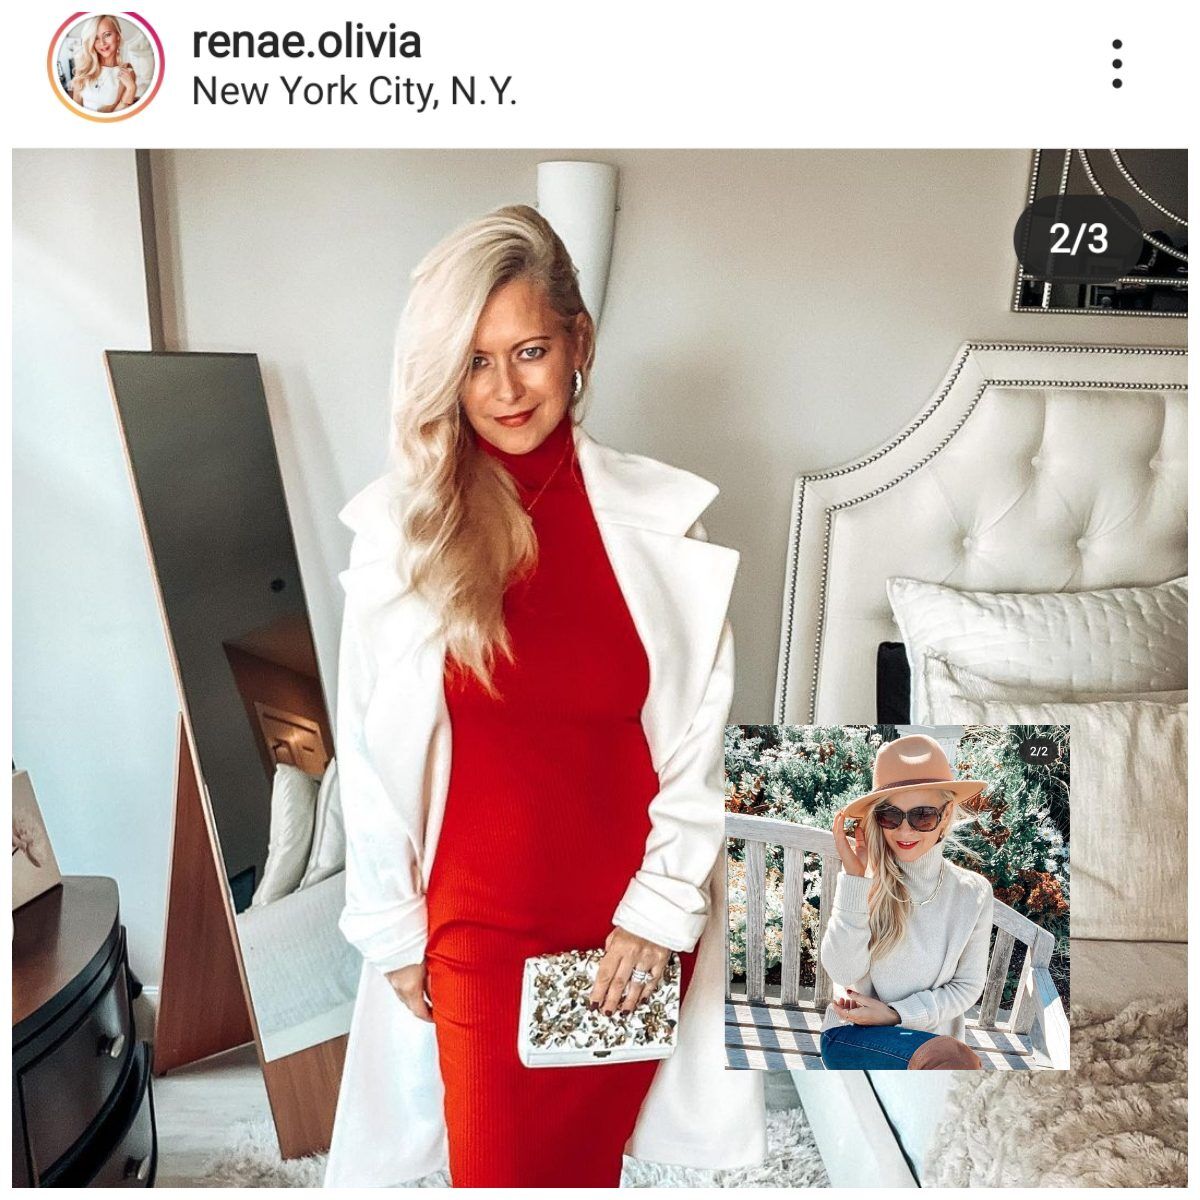 Renae Olivia - Your Ultimate Social Beauty Influence, Regardless of Age - 50 plus women